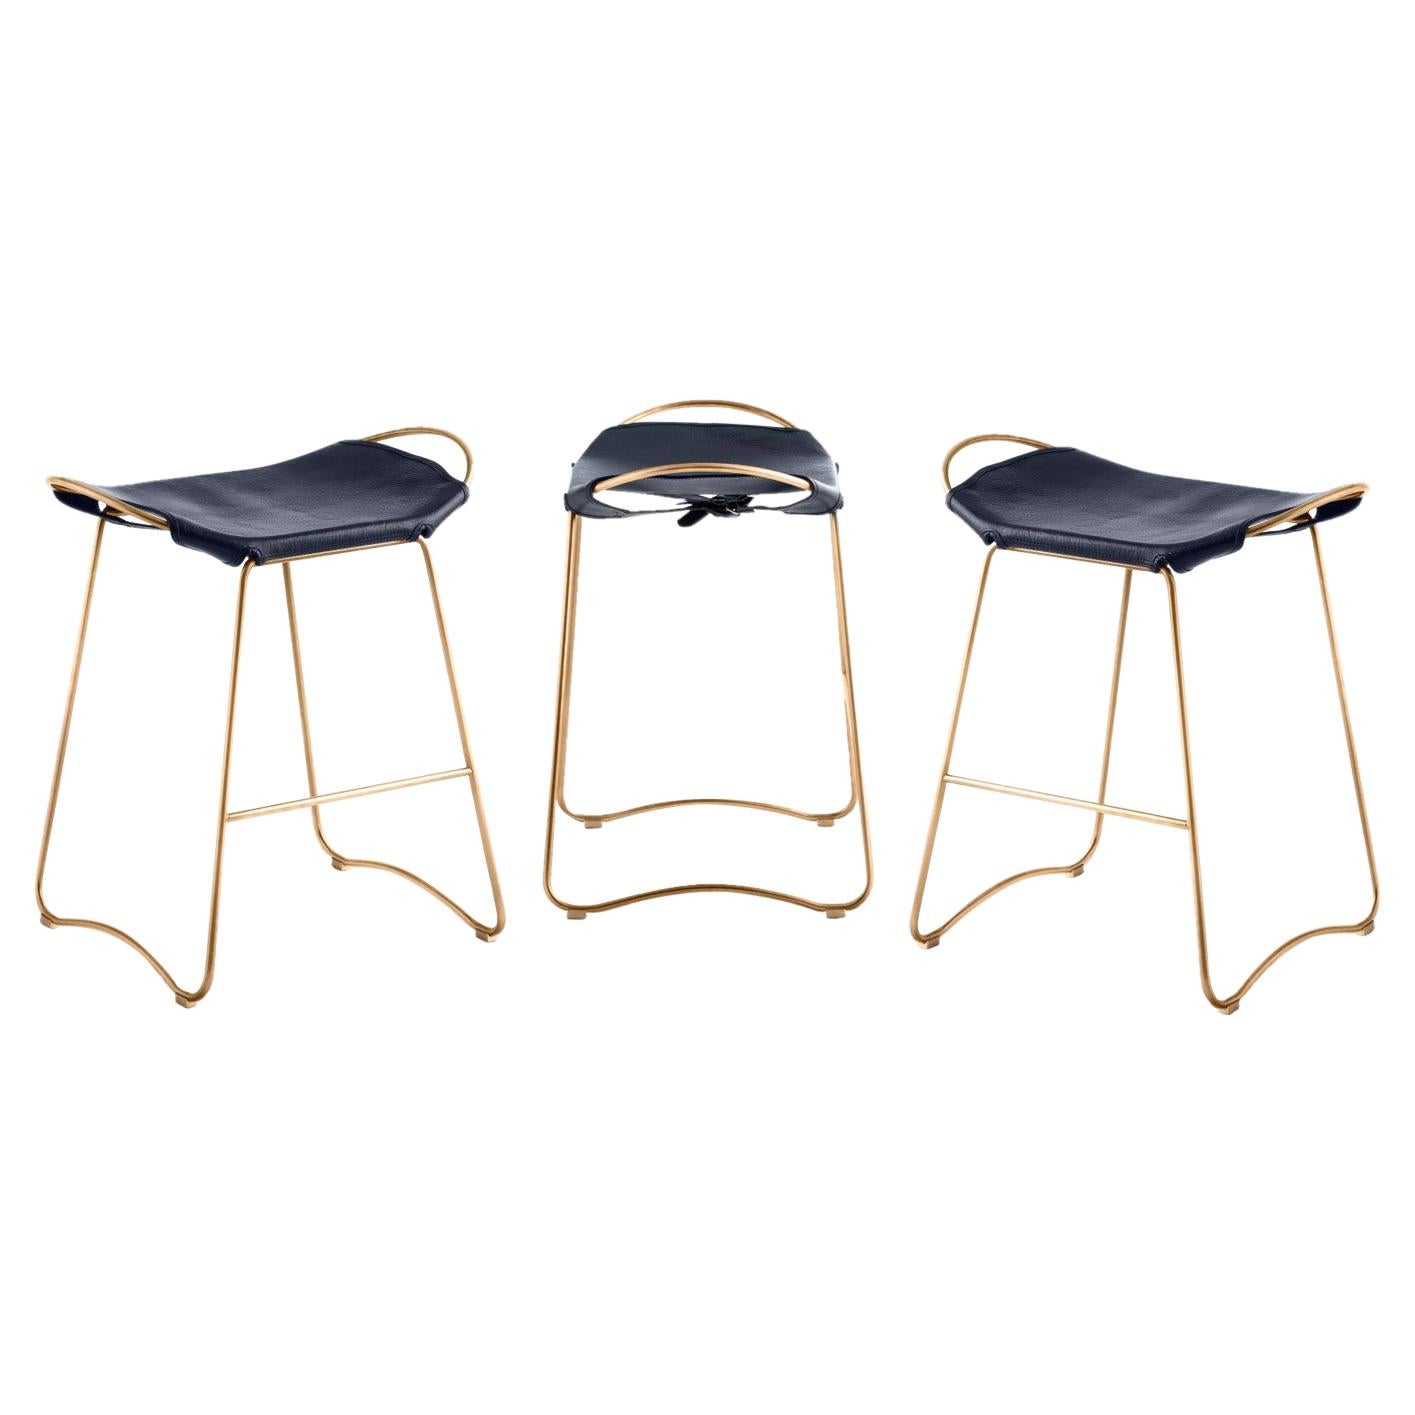 Set of 3 Contemporary Kitchen Counter Bar Stool Aged Brass Metal & Navy Leather